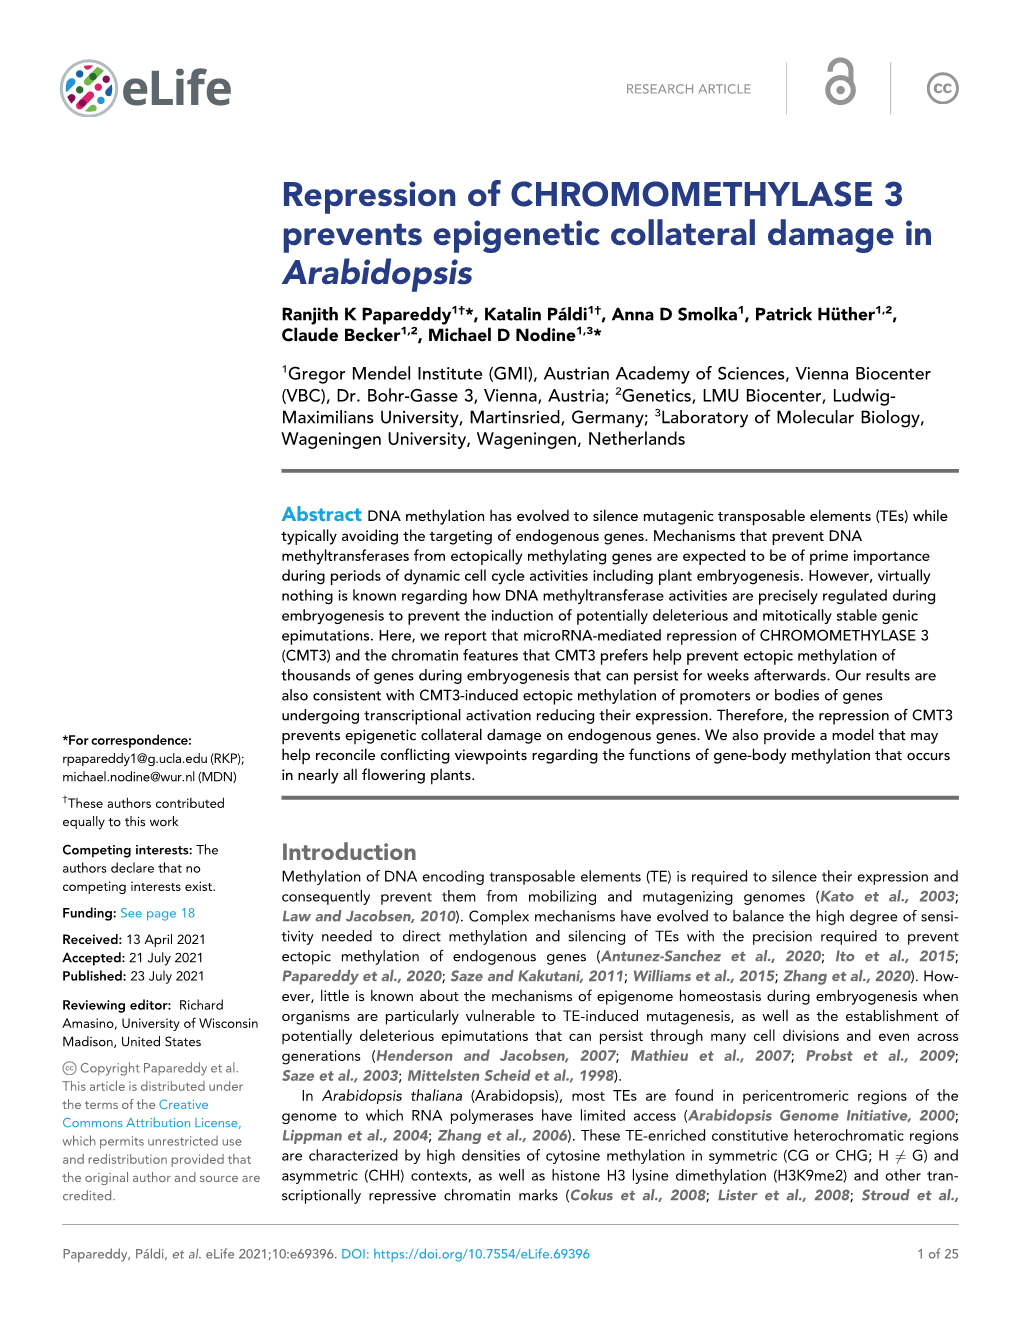 Repression of CHROMOMETHYLASE 3 Prevents Epigenetic Collateral